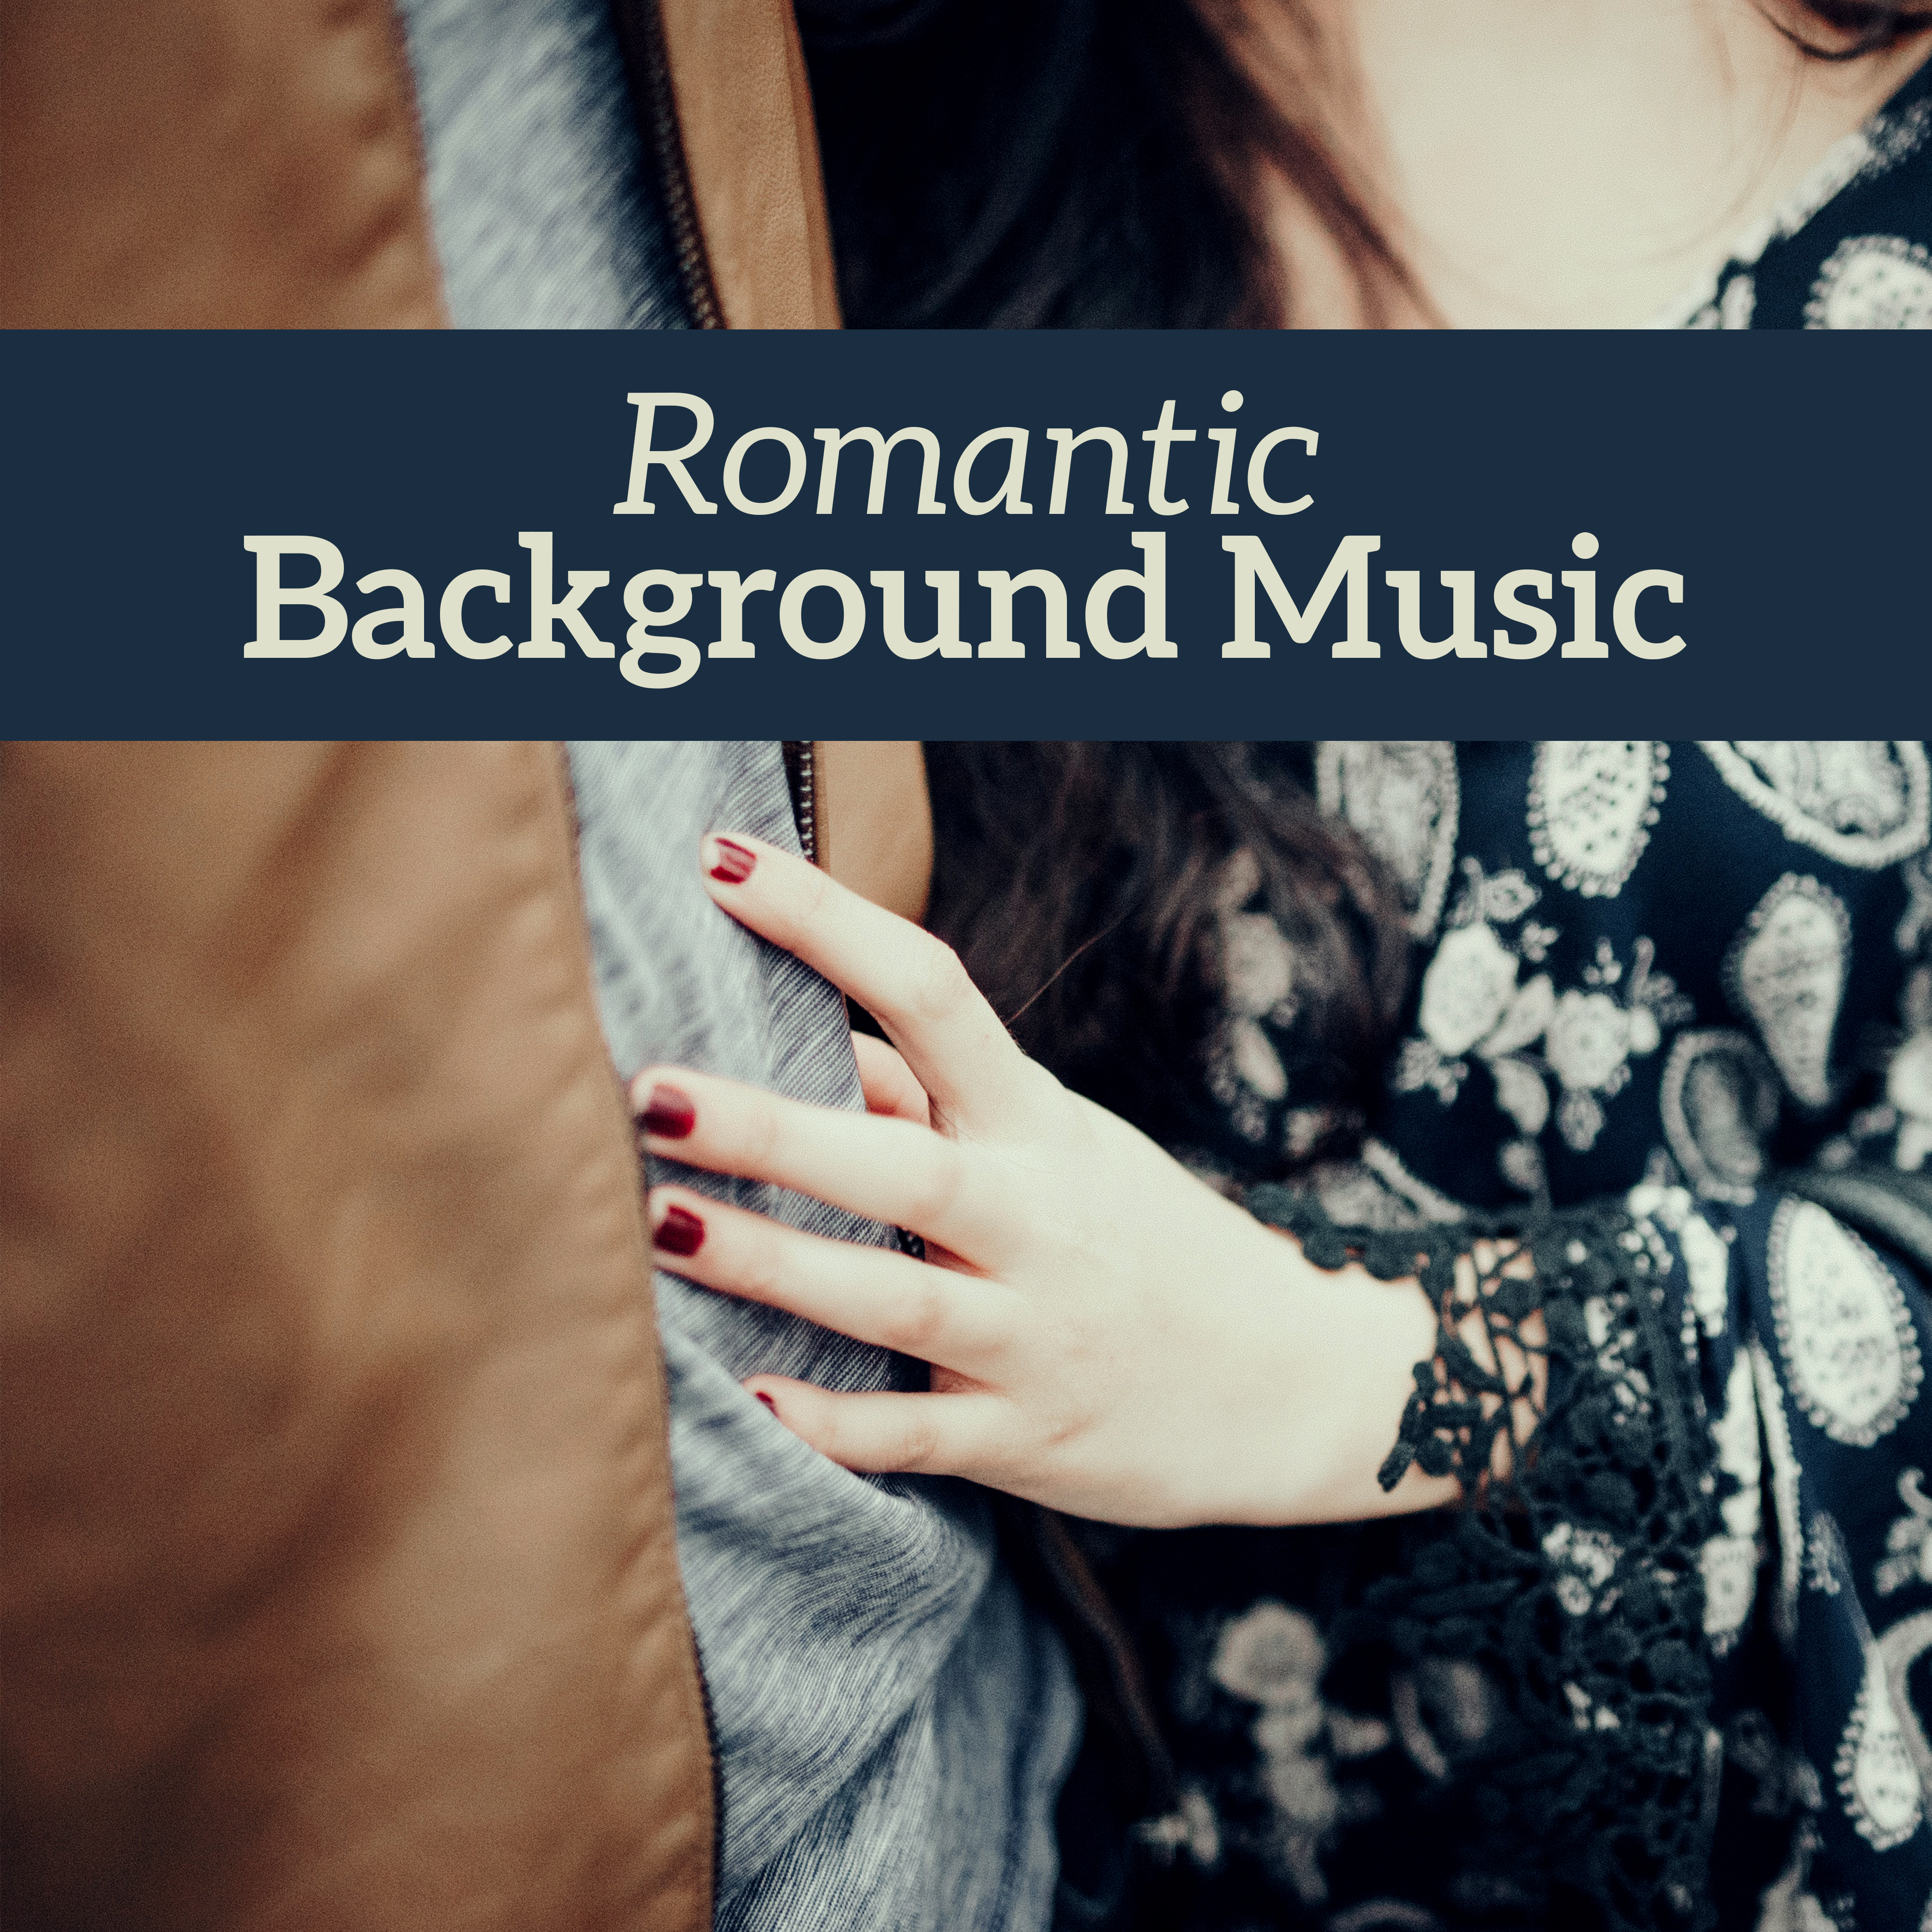 Romantic Background Music  Jazz Music for Lovers, First Kiss, Simple Love, Piano Bar